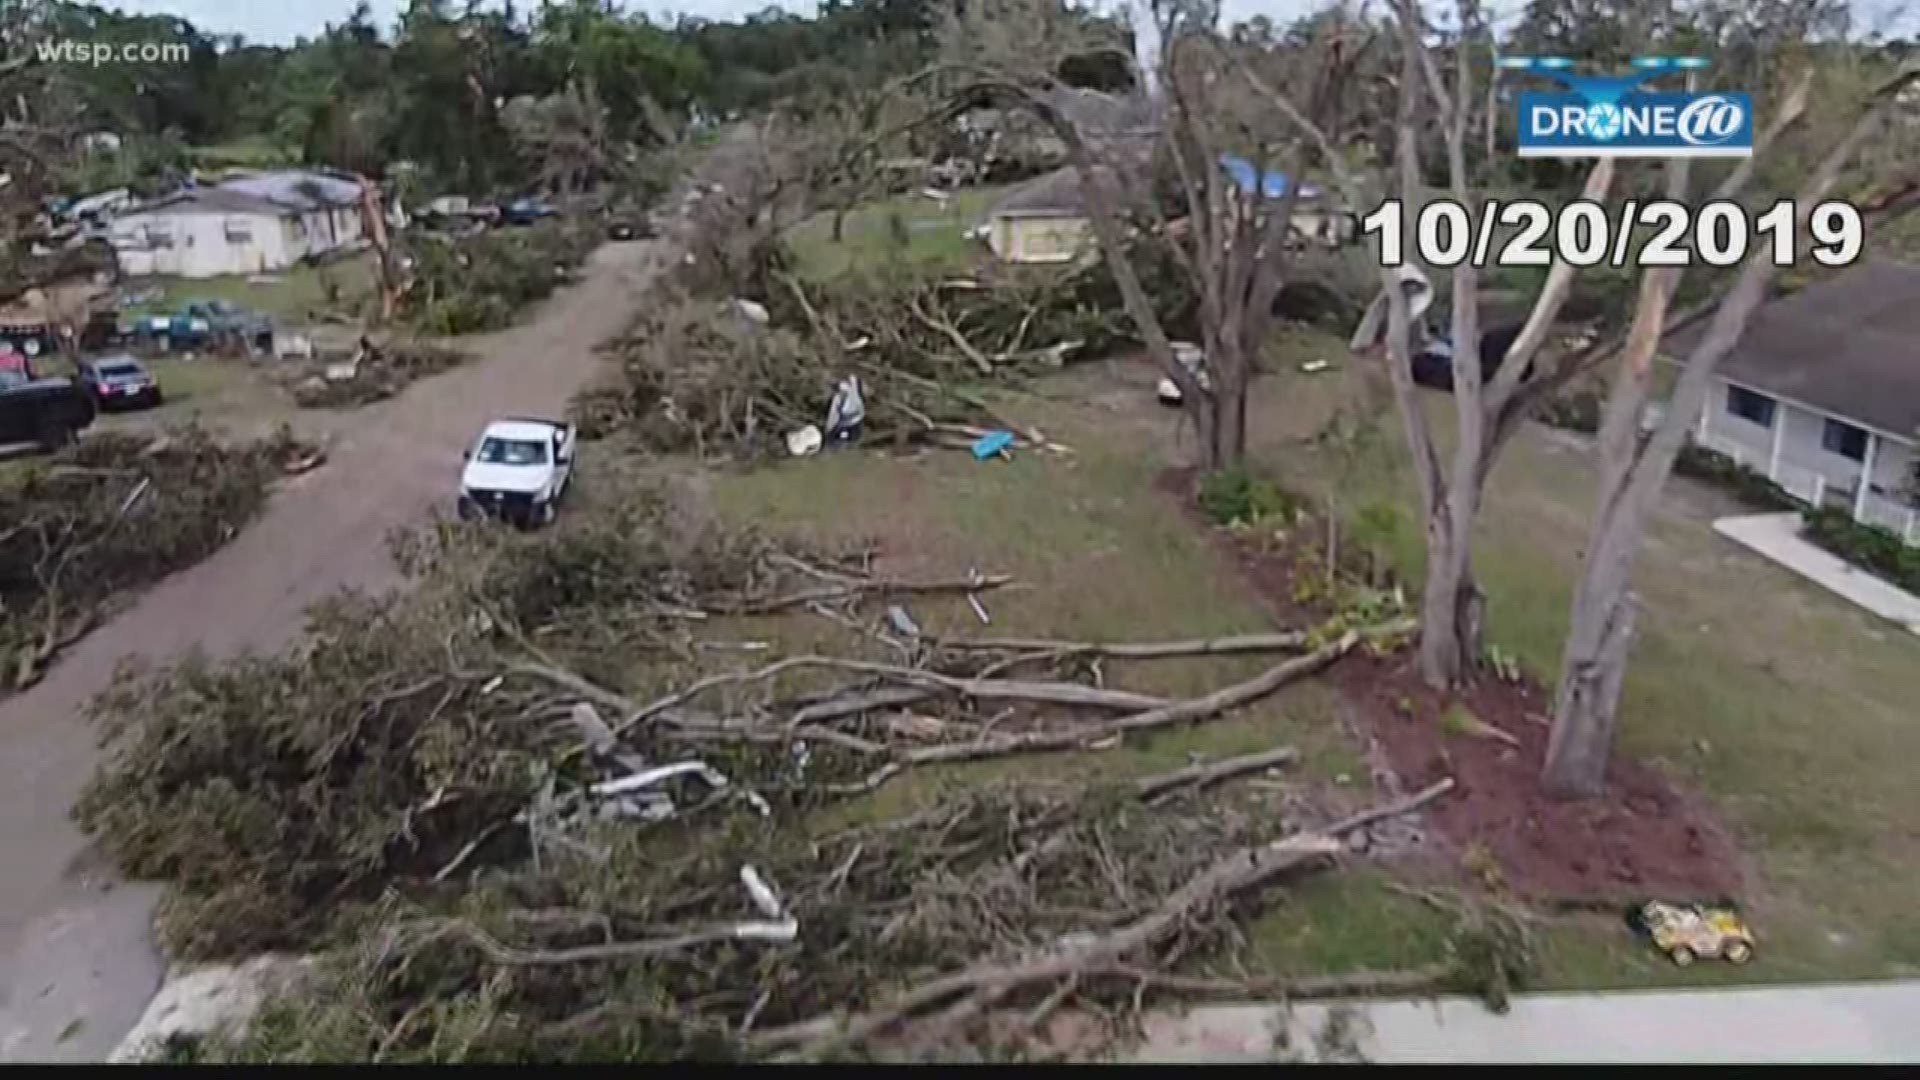 It's been three weeks since an EF-2 tornado touched down in Kathleen, Florida.